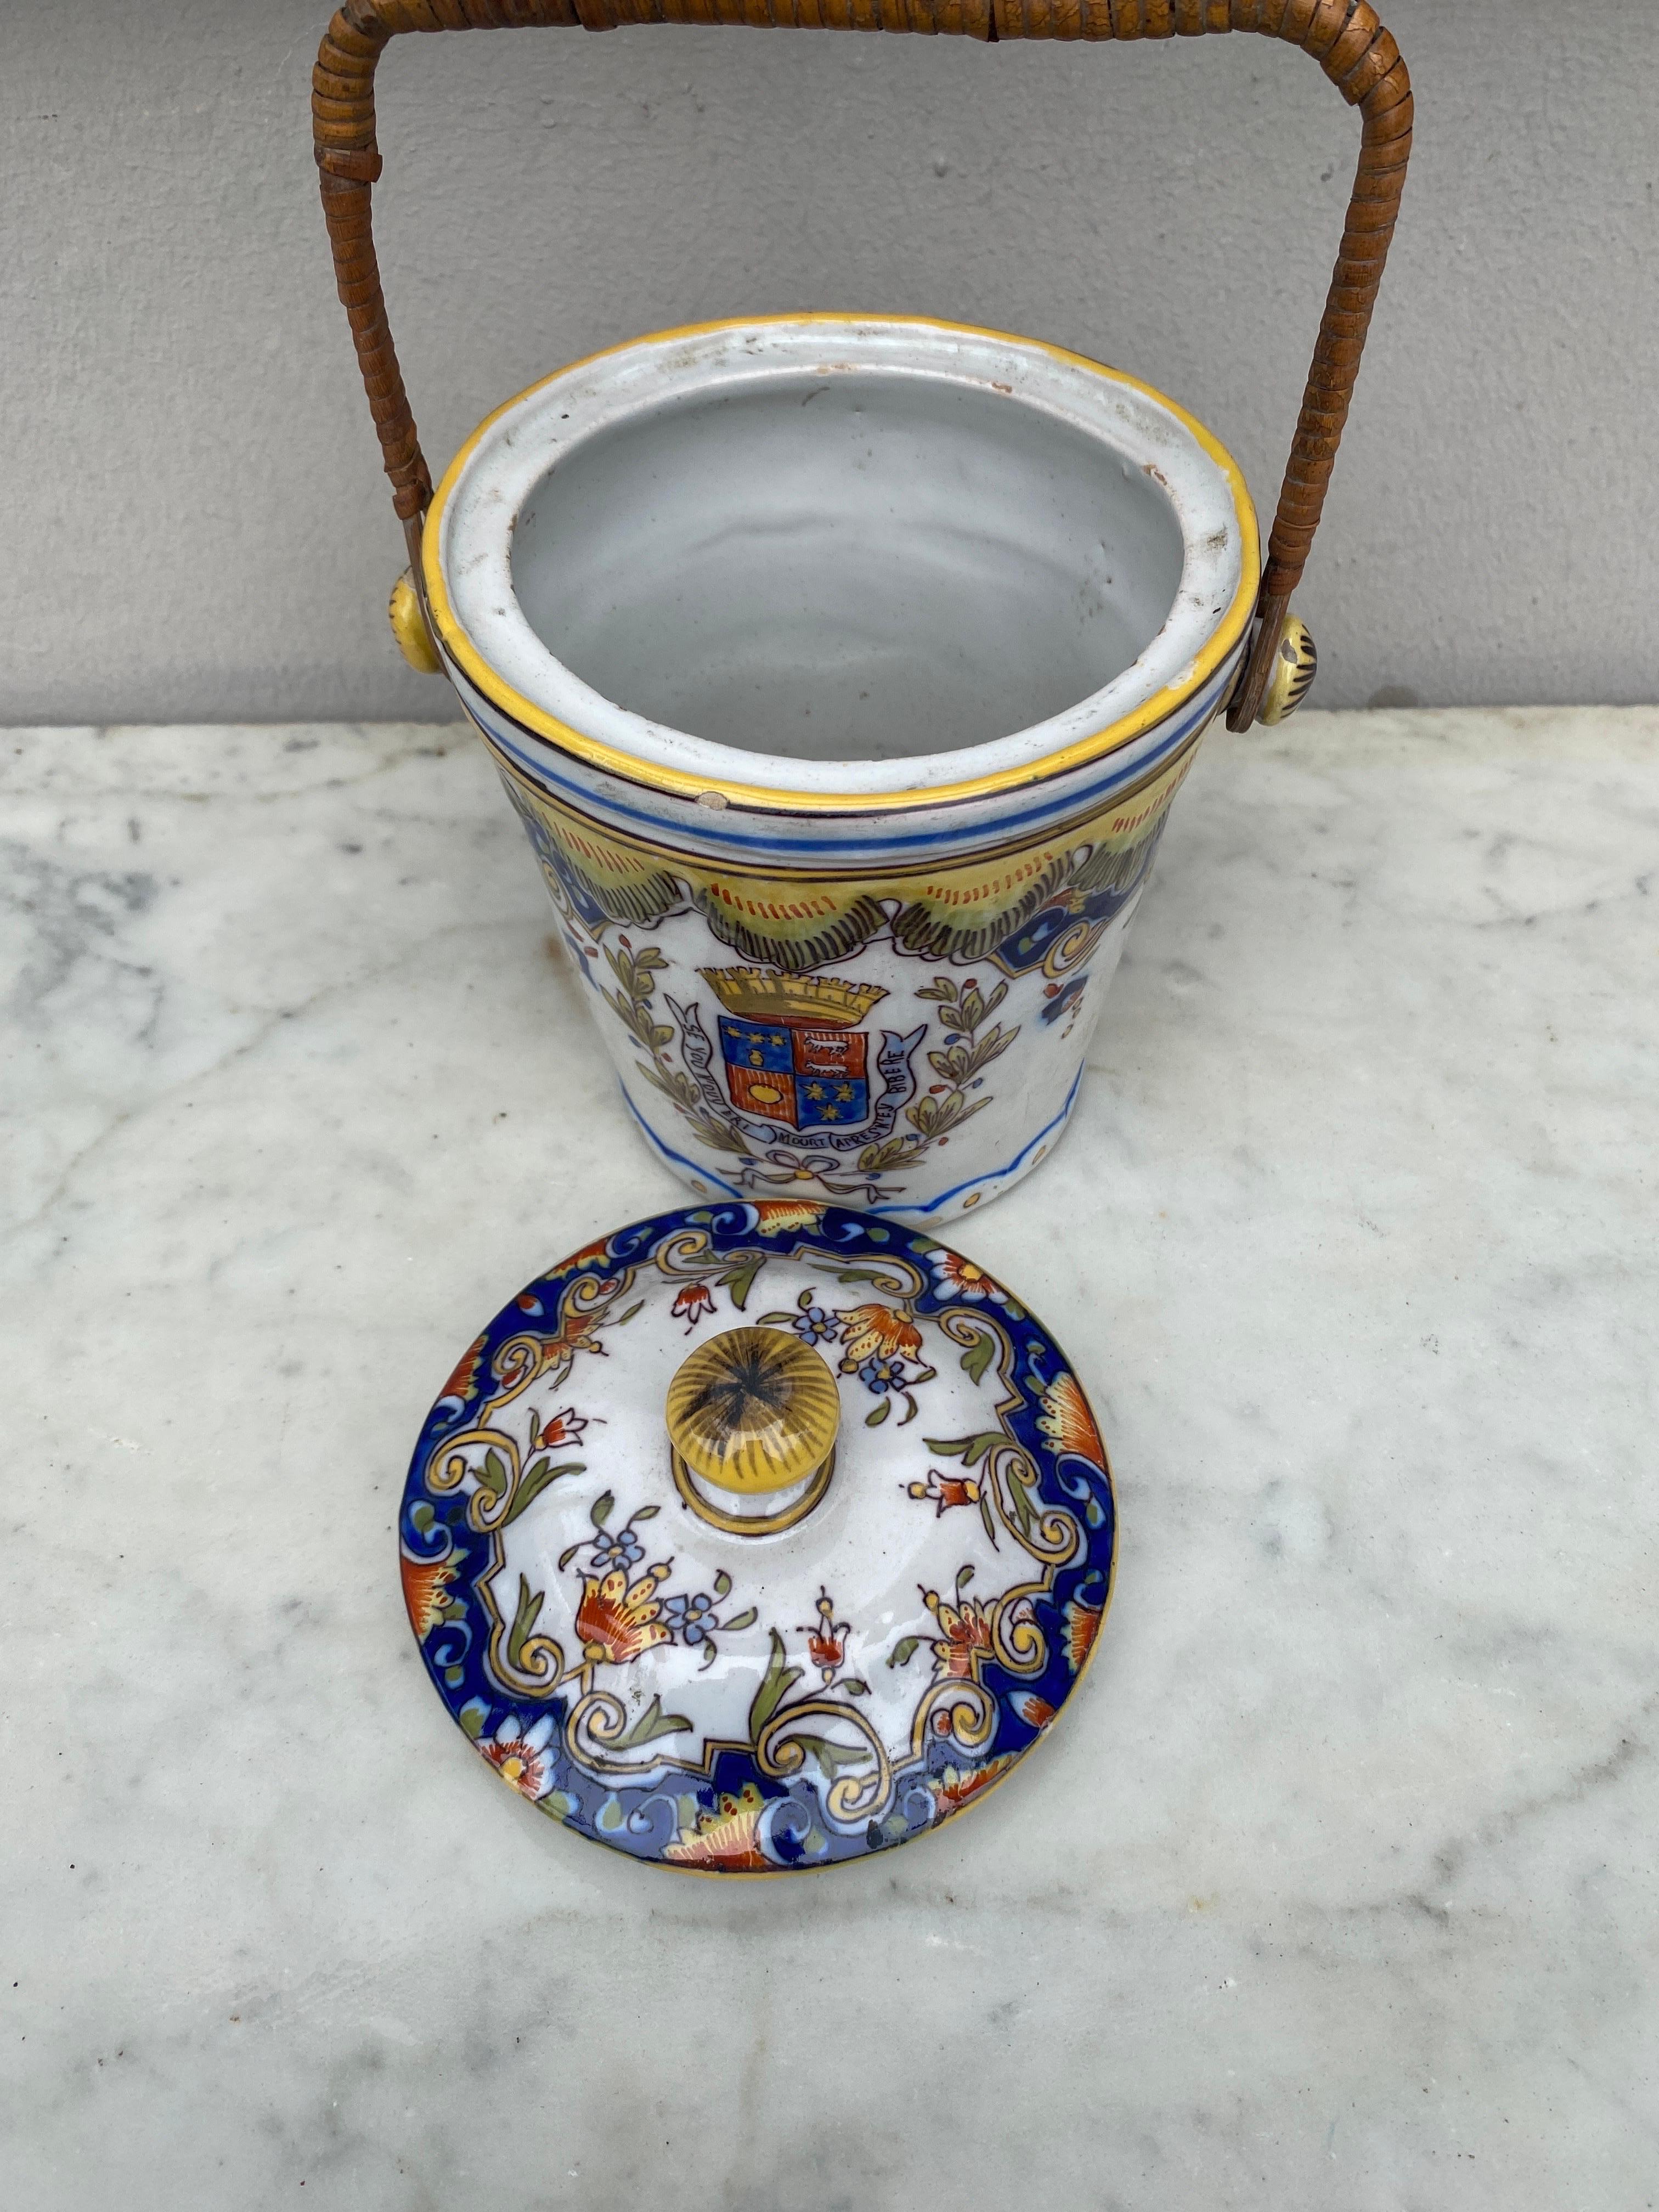 Rustic French Faience Biscuit Barrel Desvres Circa 1900 For Sale